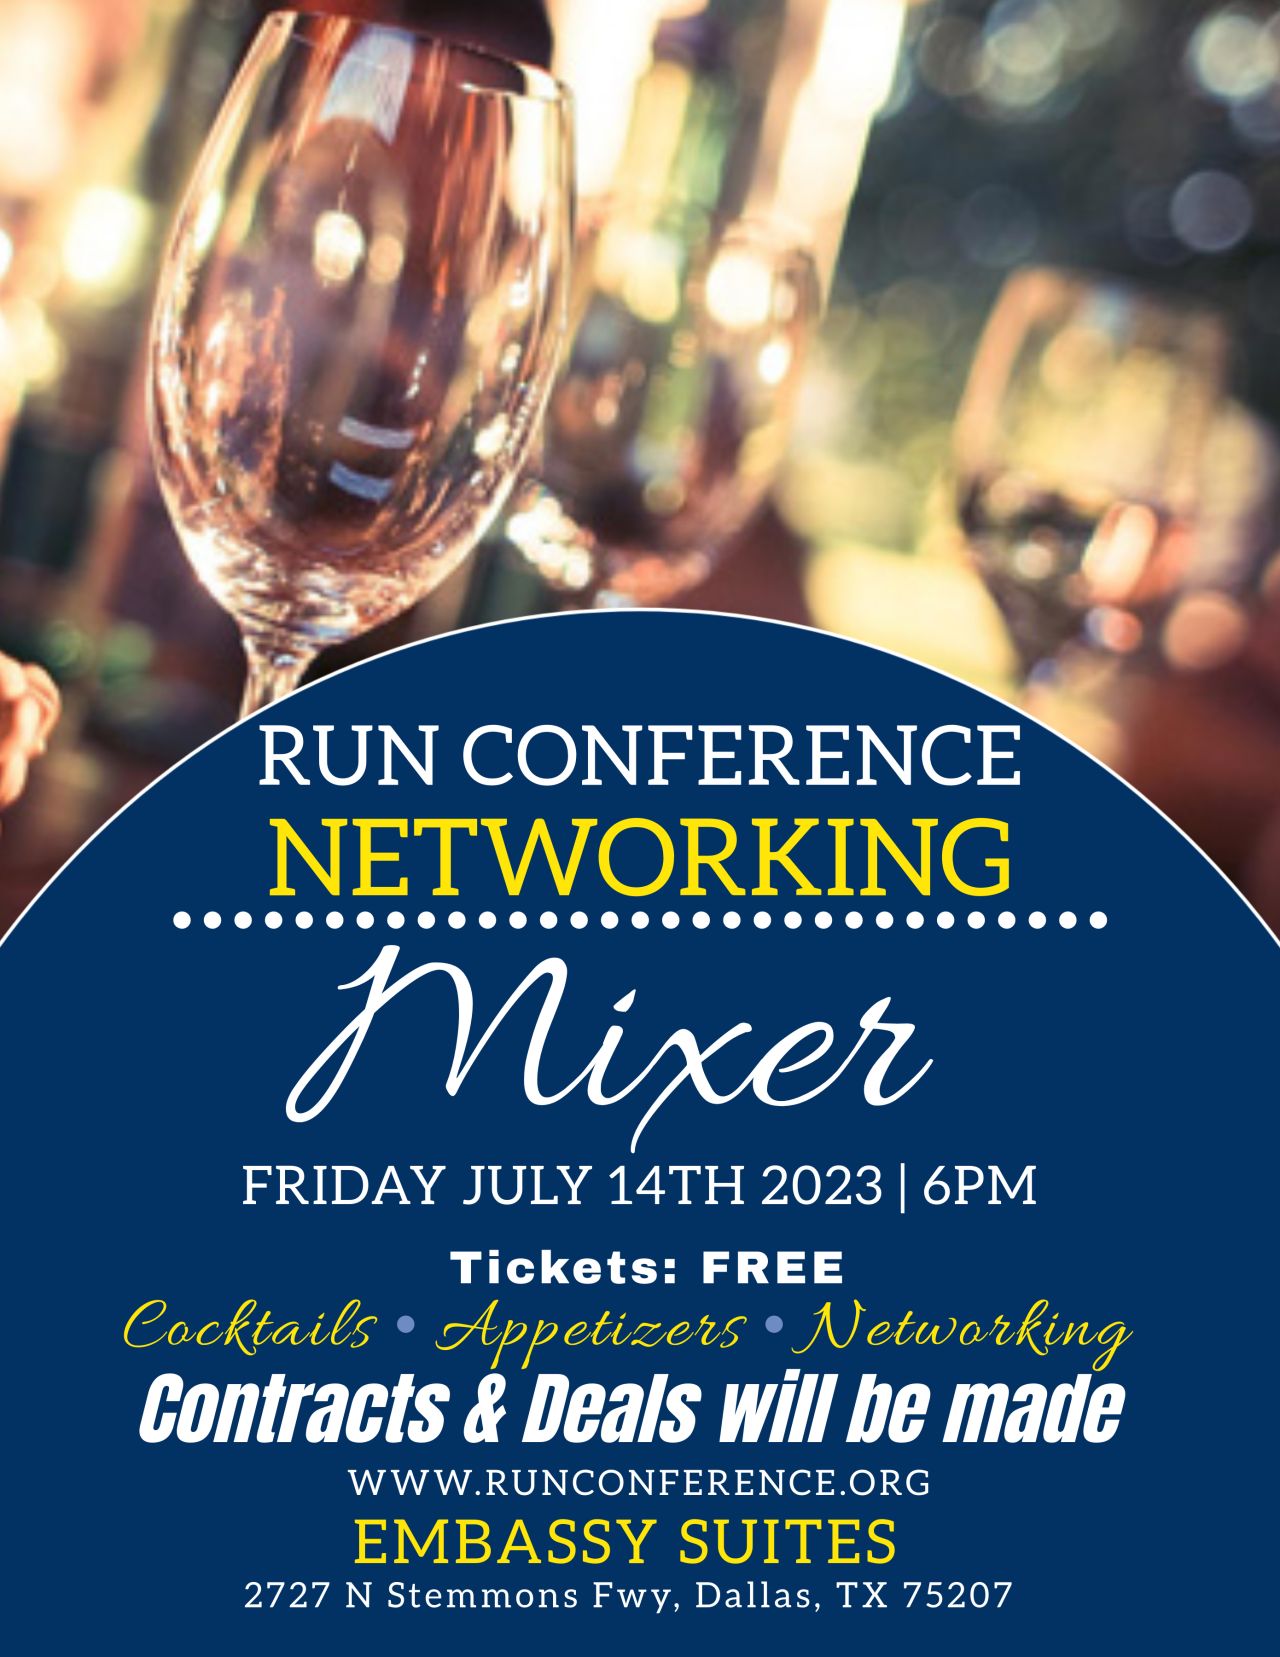 Run Conference Networking Event for ALL Business Owners